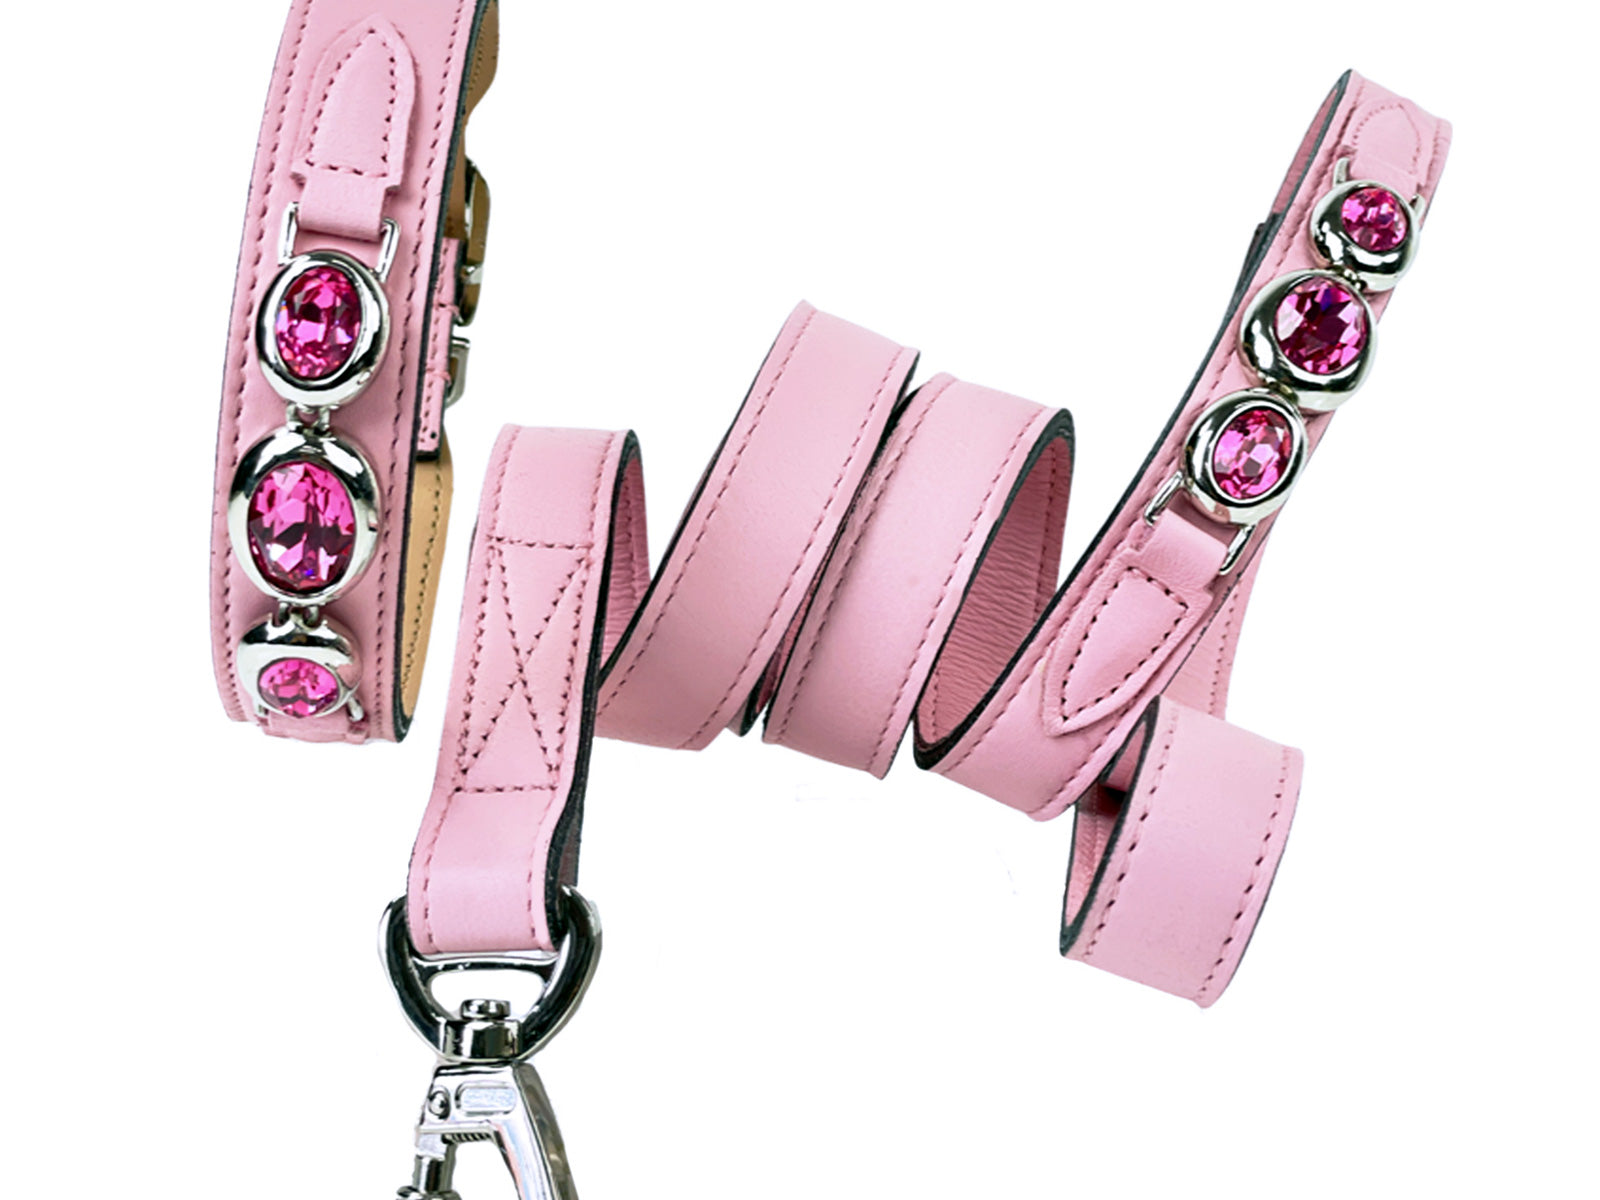 Regency Luxury Dog Collar and Leash Collection